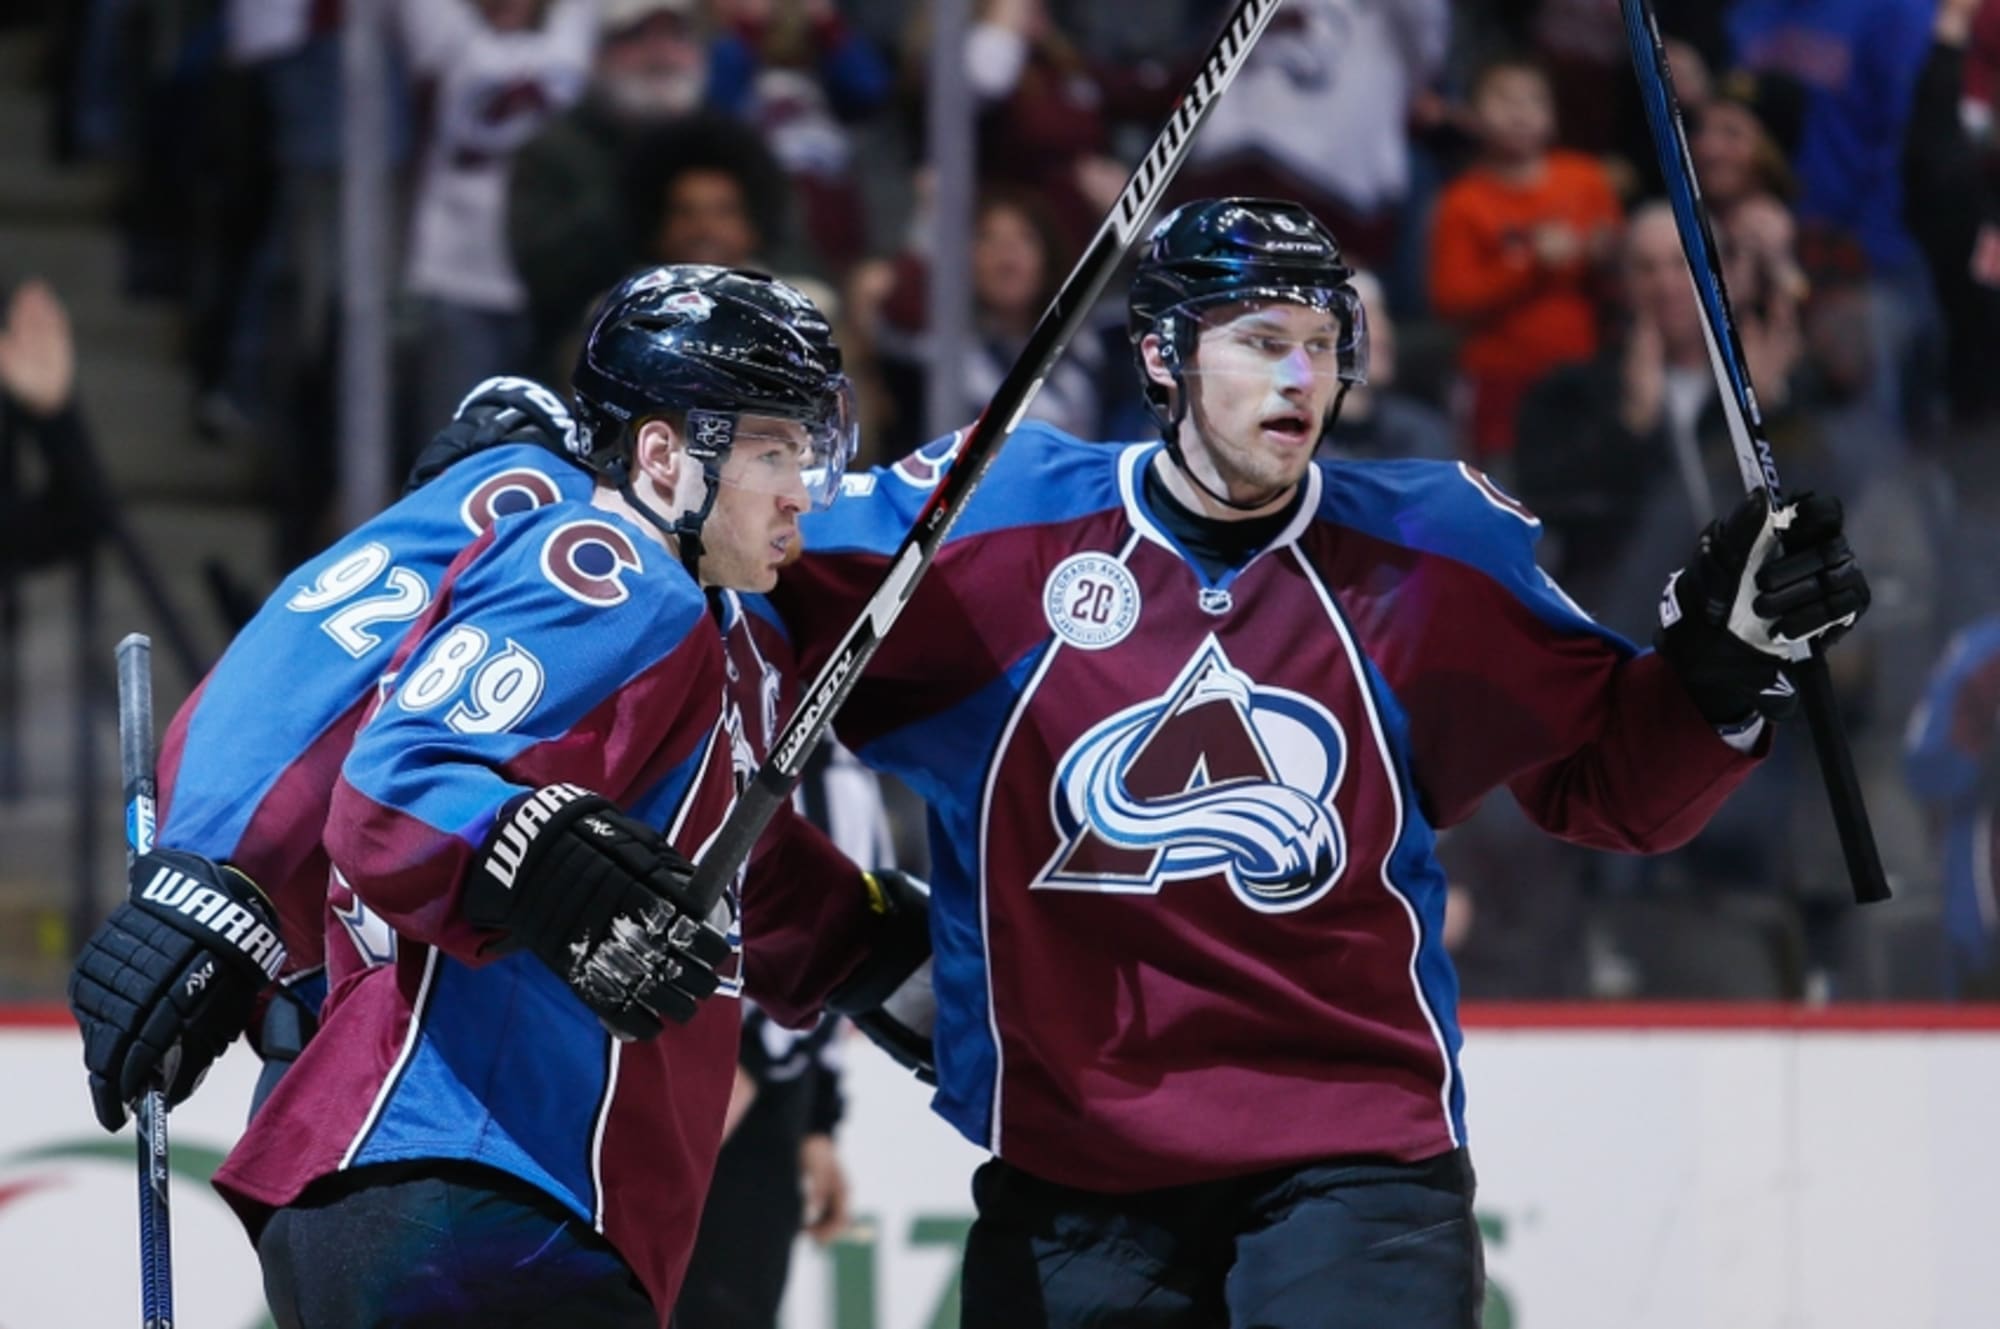 Let's keep up our winning ways! - Colorado Avalanche